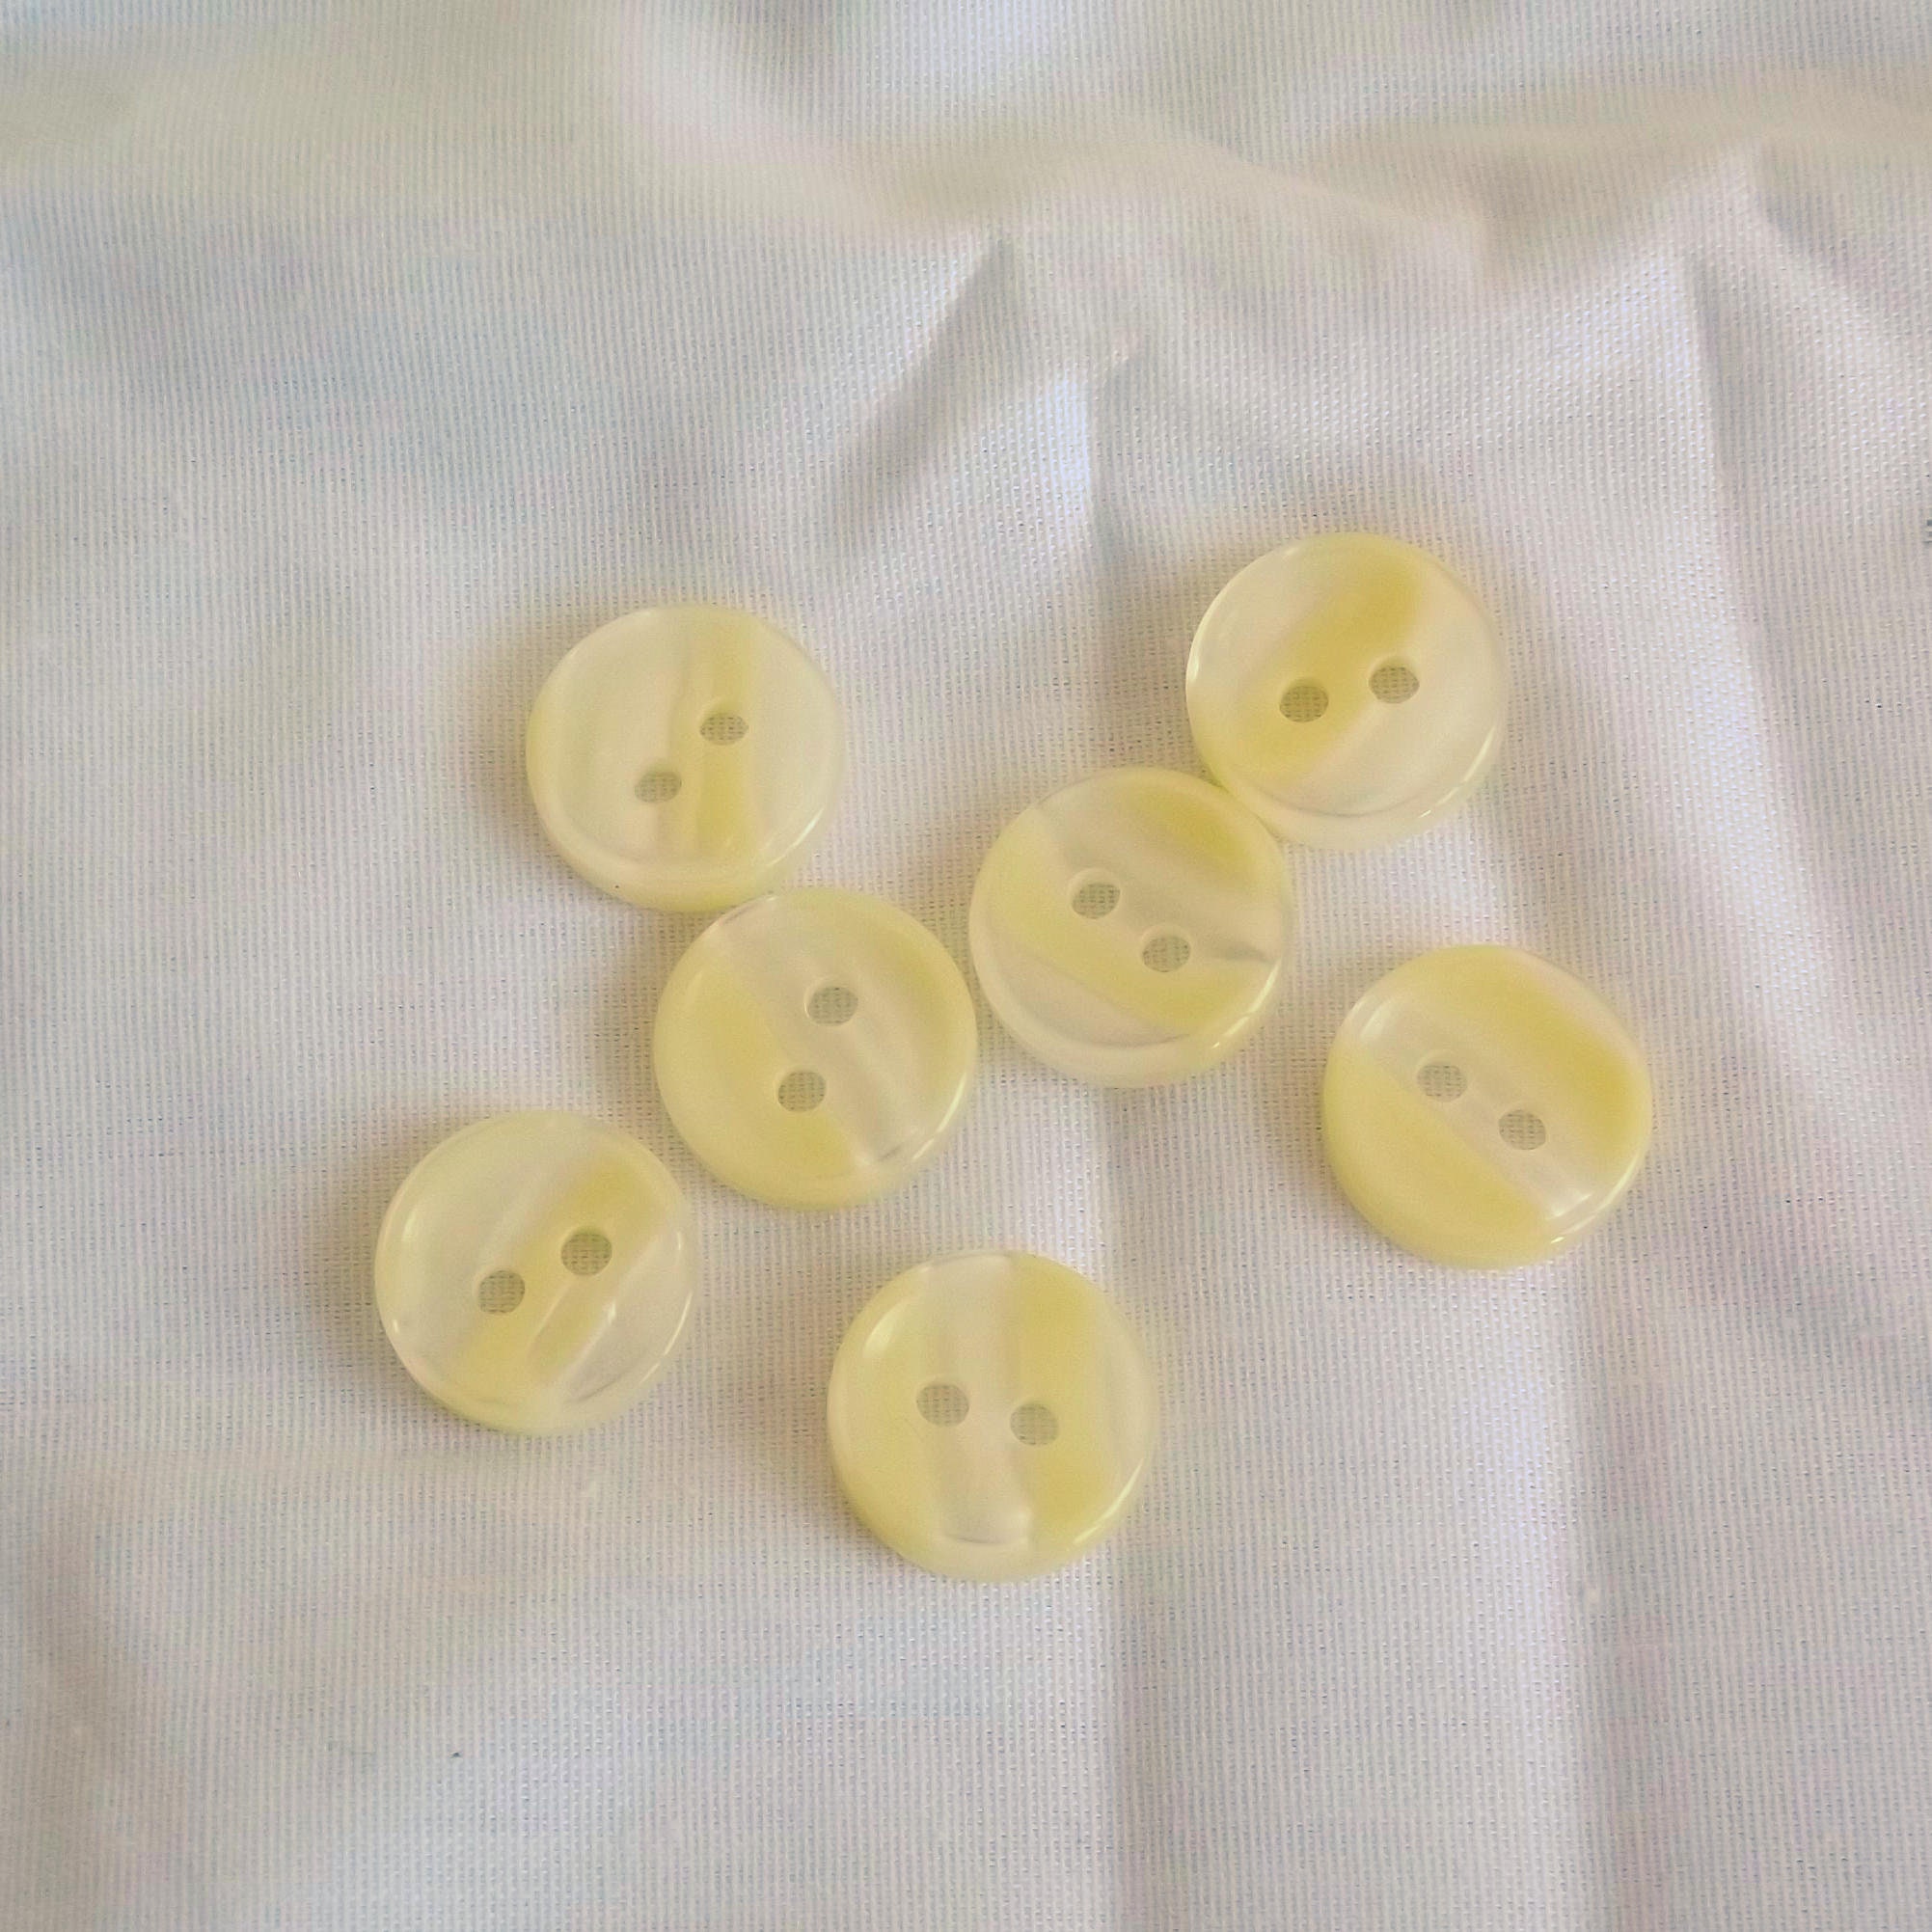 Lemon Buttons Lemon shaded 2 hole Buttons 12mm Buttons 2 | Etsy